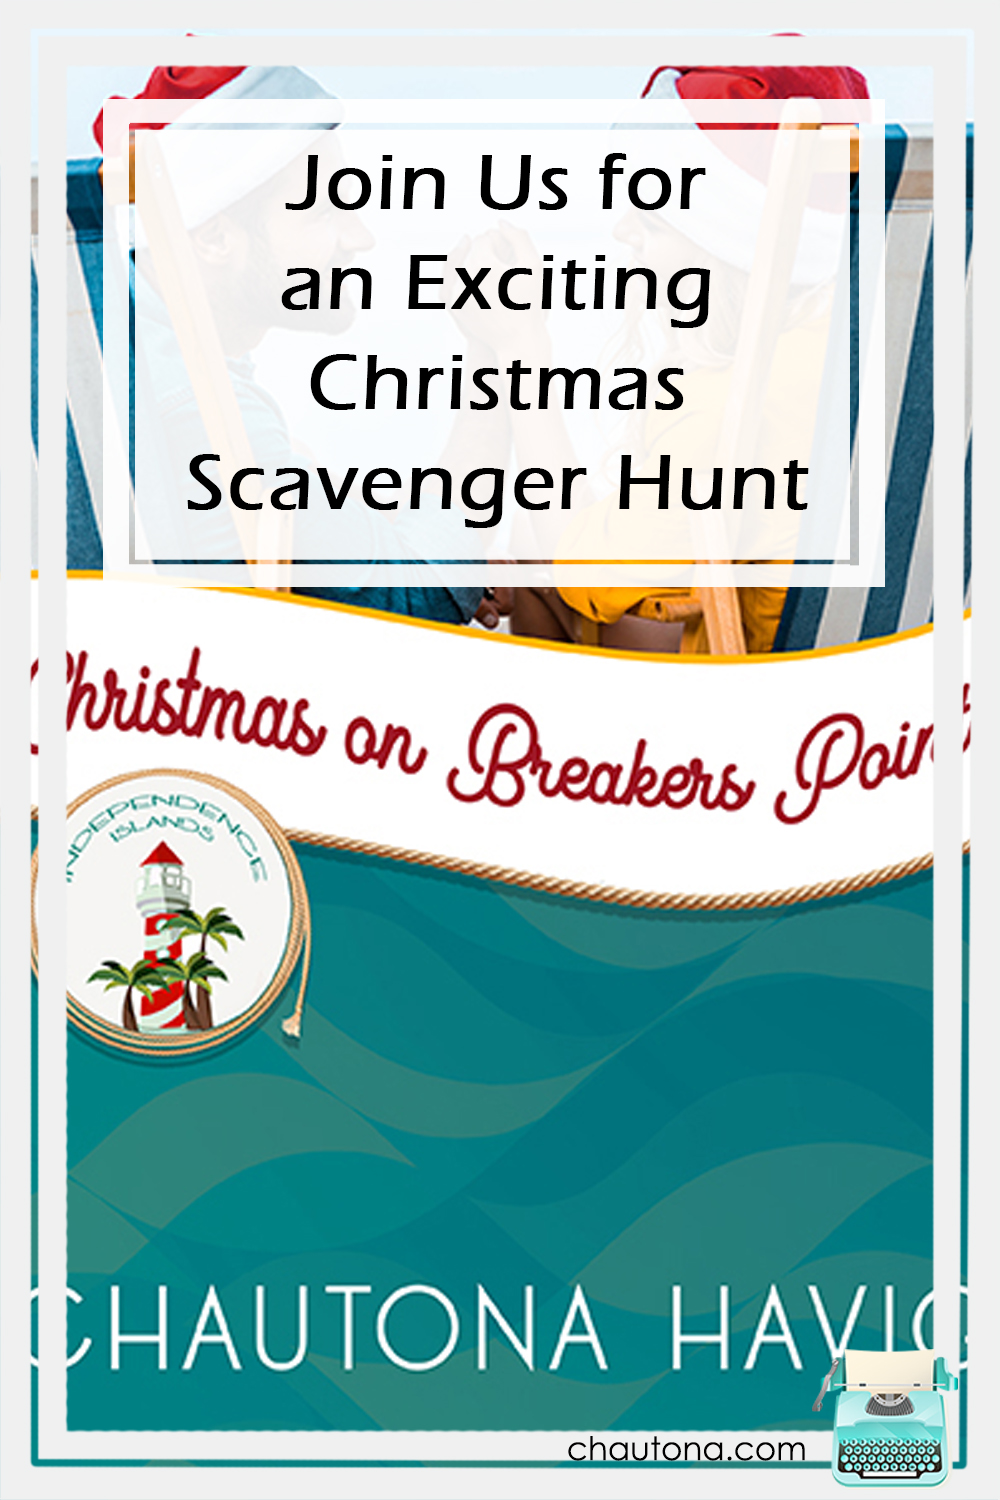 We have an exciting Christmas Scavenger Hunt for you! Excellent prizes, lots of fun, and all bookish fun! Stop in and follow the links! via @chautonahavig